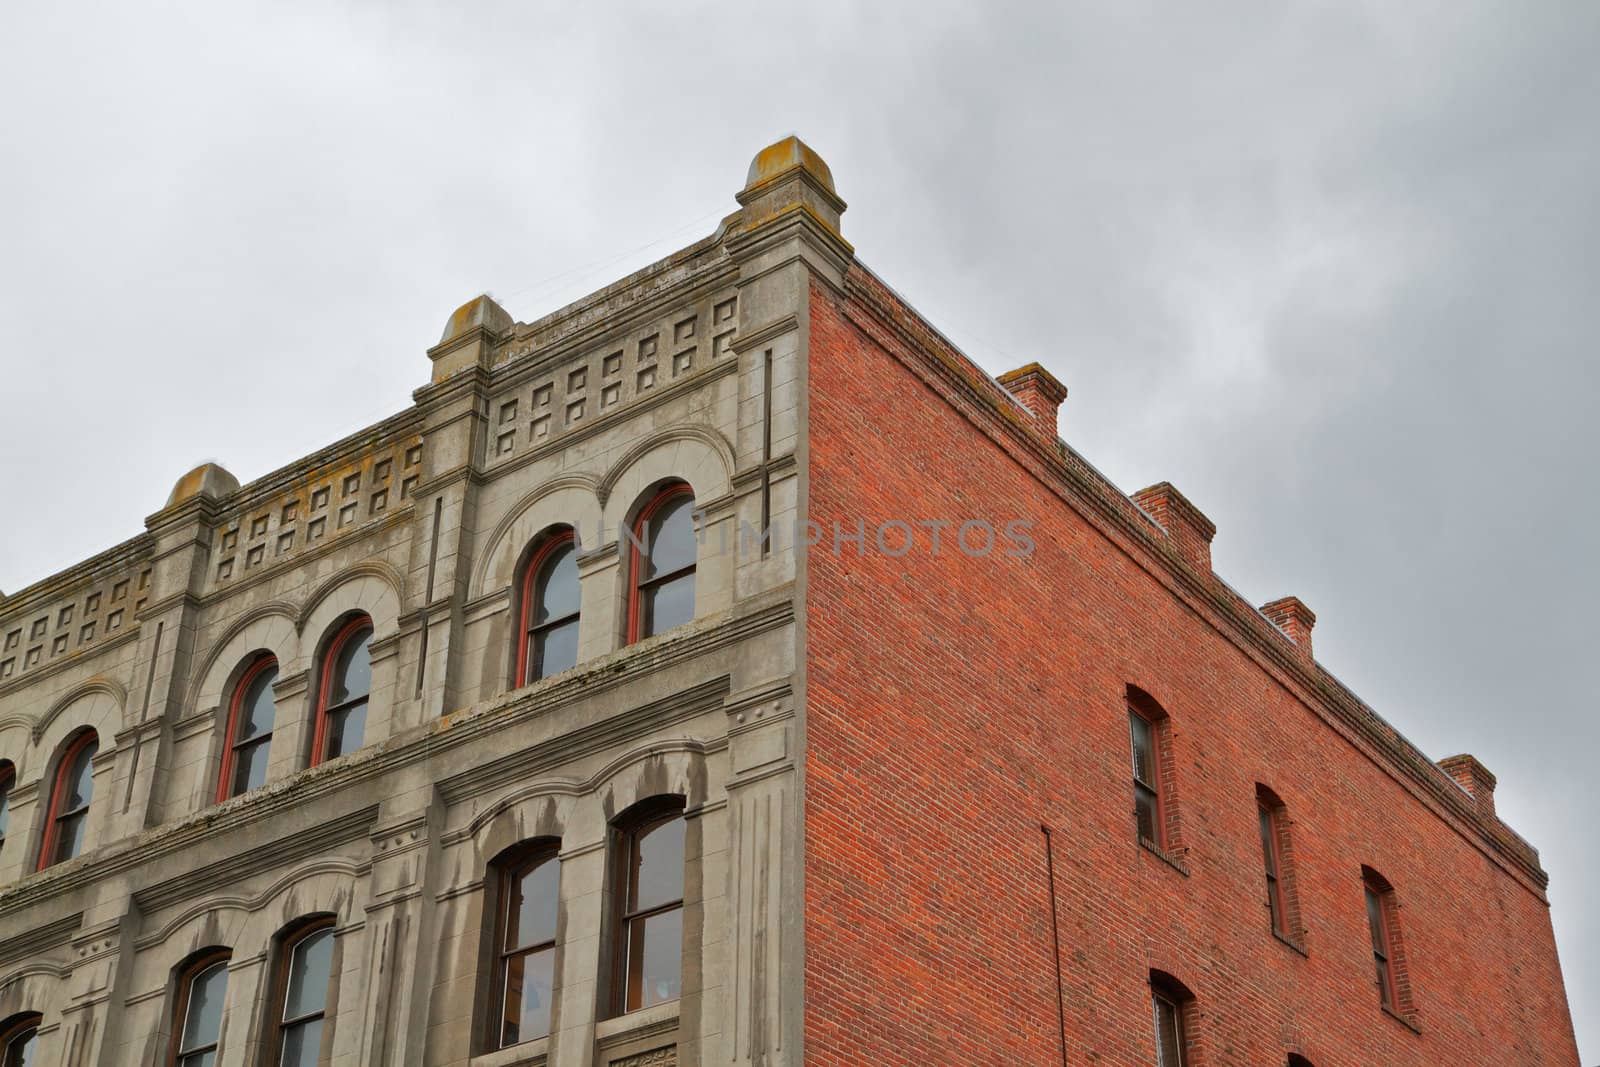 Old red brick building with a stone facade against a cloudy sky